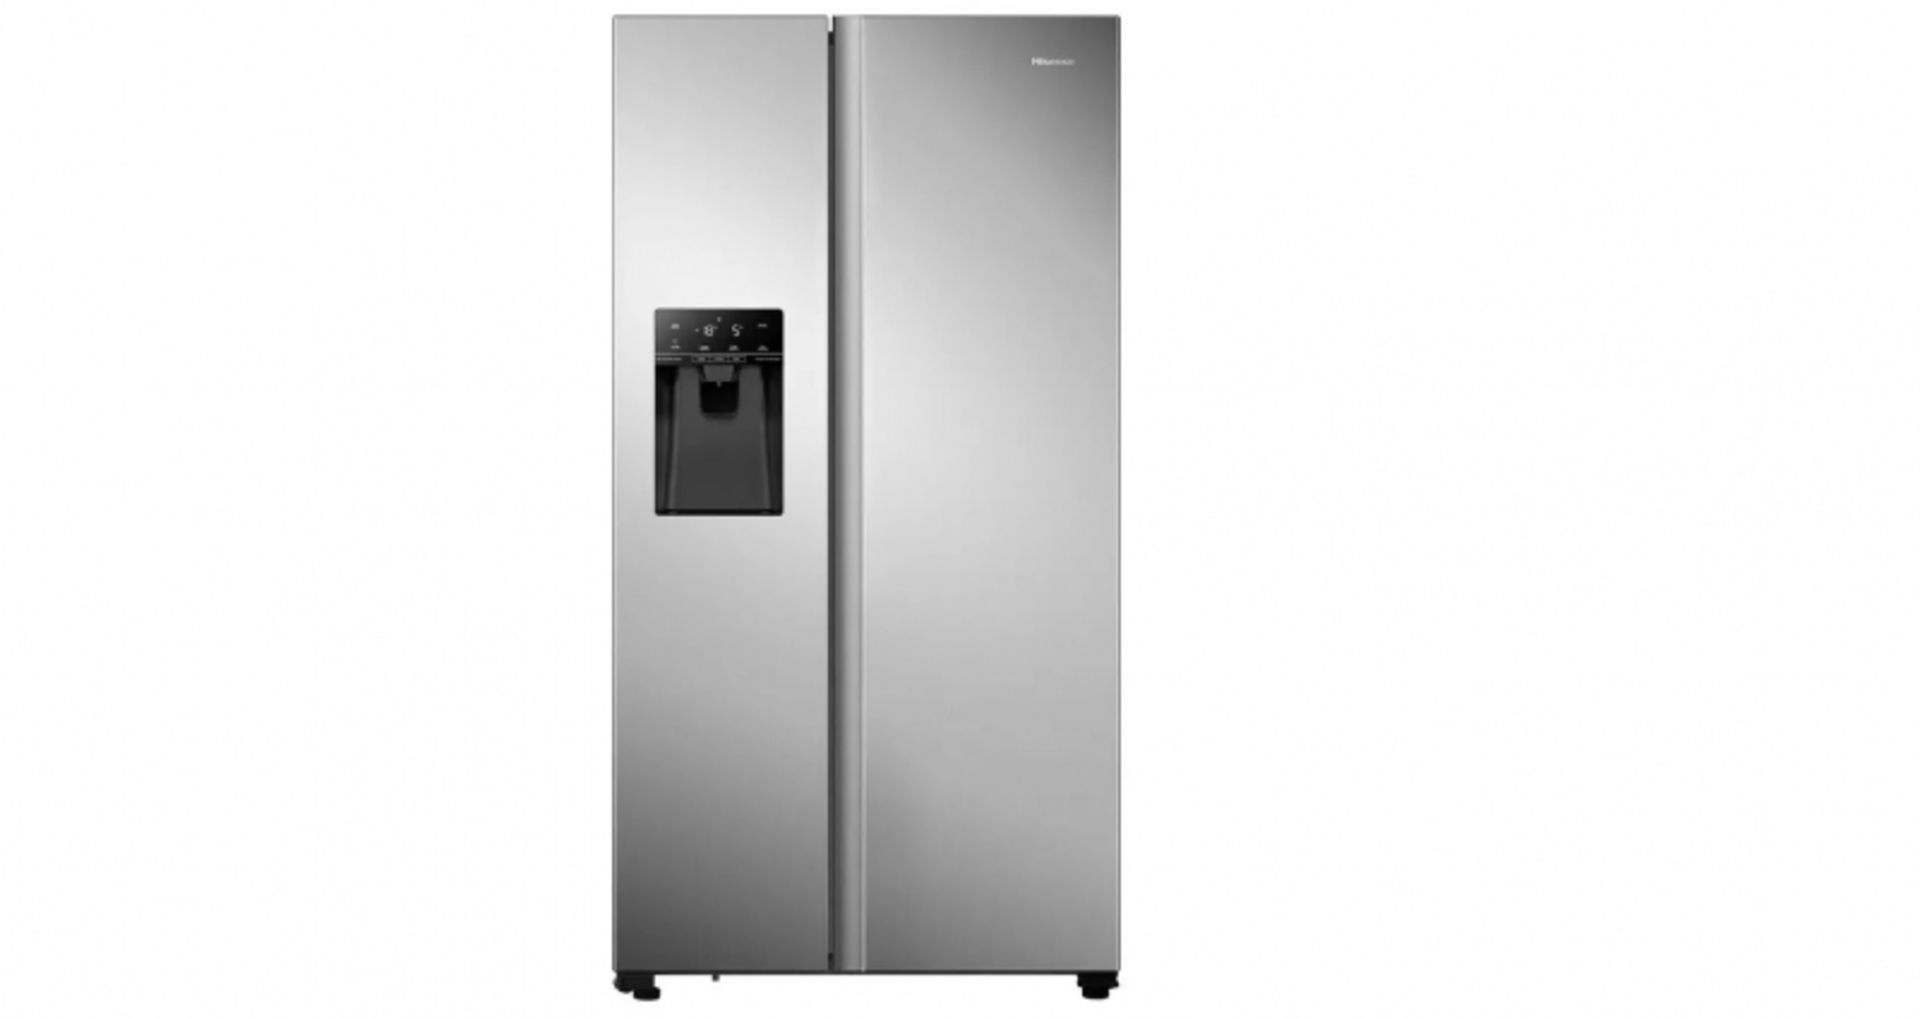 1 x HiSense Pureflat RS694/N4TCF Stainless Steel Fridge Freezer With Water and Ice Dispenser - - Image 7 of 7